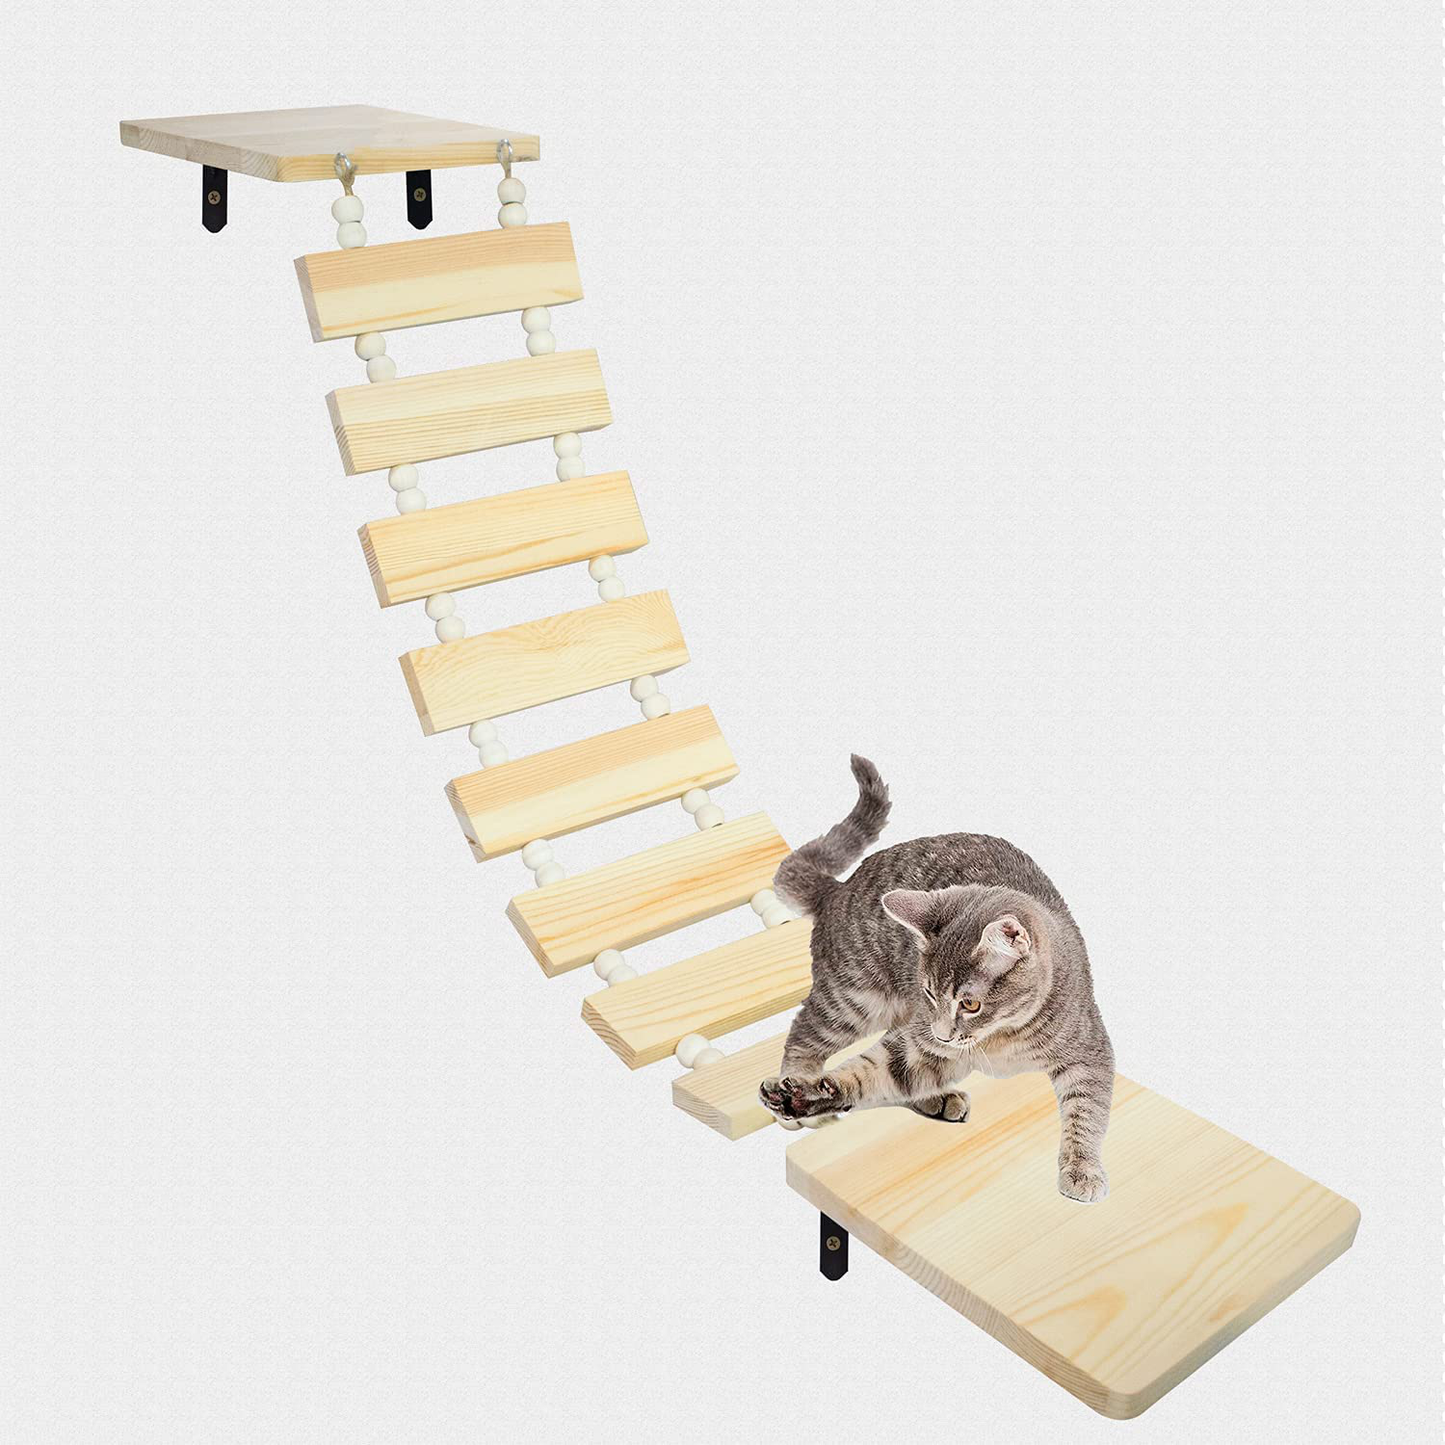 Cat Bridge Ladder Wooden Cloud Shelf Board Handcrafted Springboard Climbing Frame Combination Wall-Mounted Steps & Bed Natural Wood Jumping Platform for Cats Perch to Rest and Play Animals & Pet Supplies > Pet Supplies > Cat Supplies > Cat Furniture MiDube   